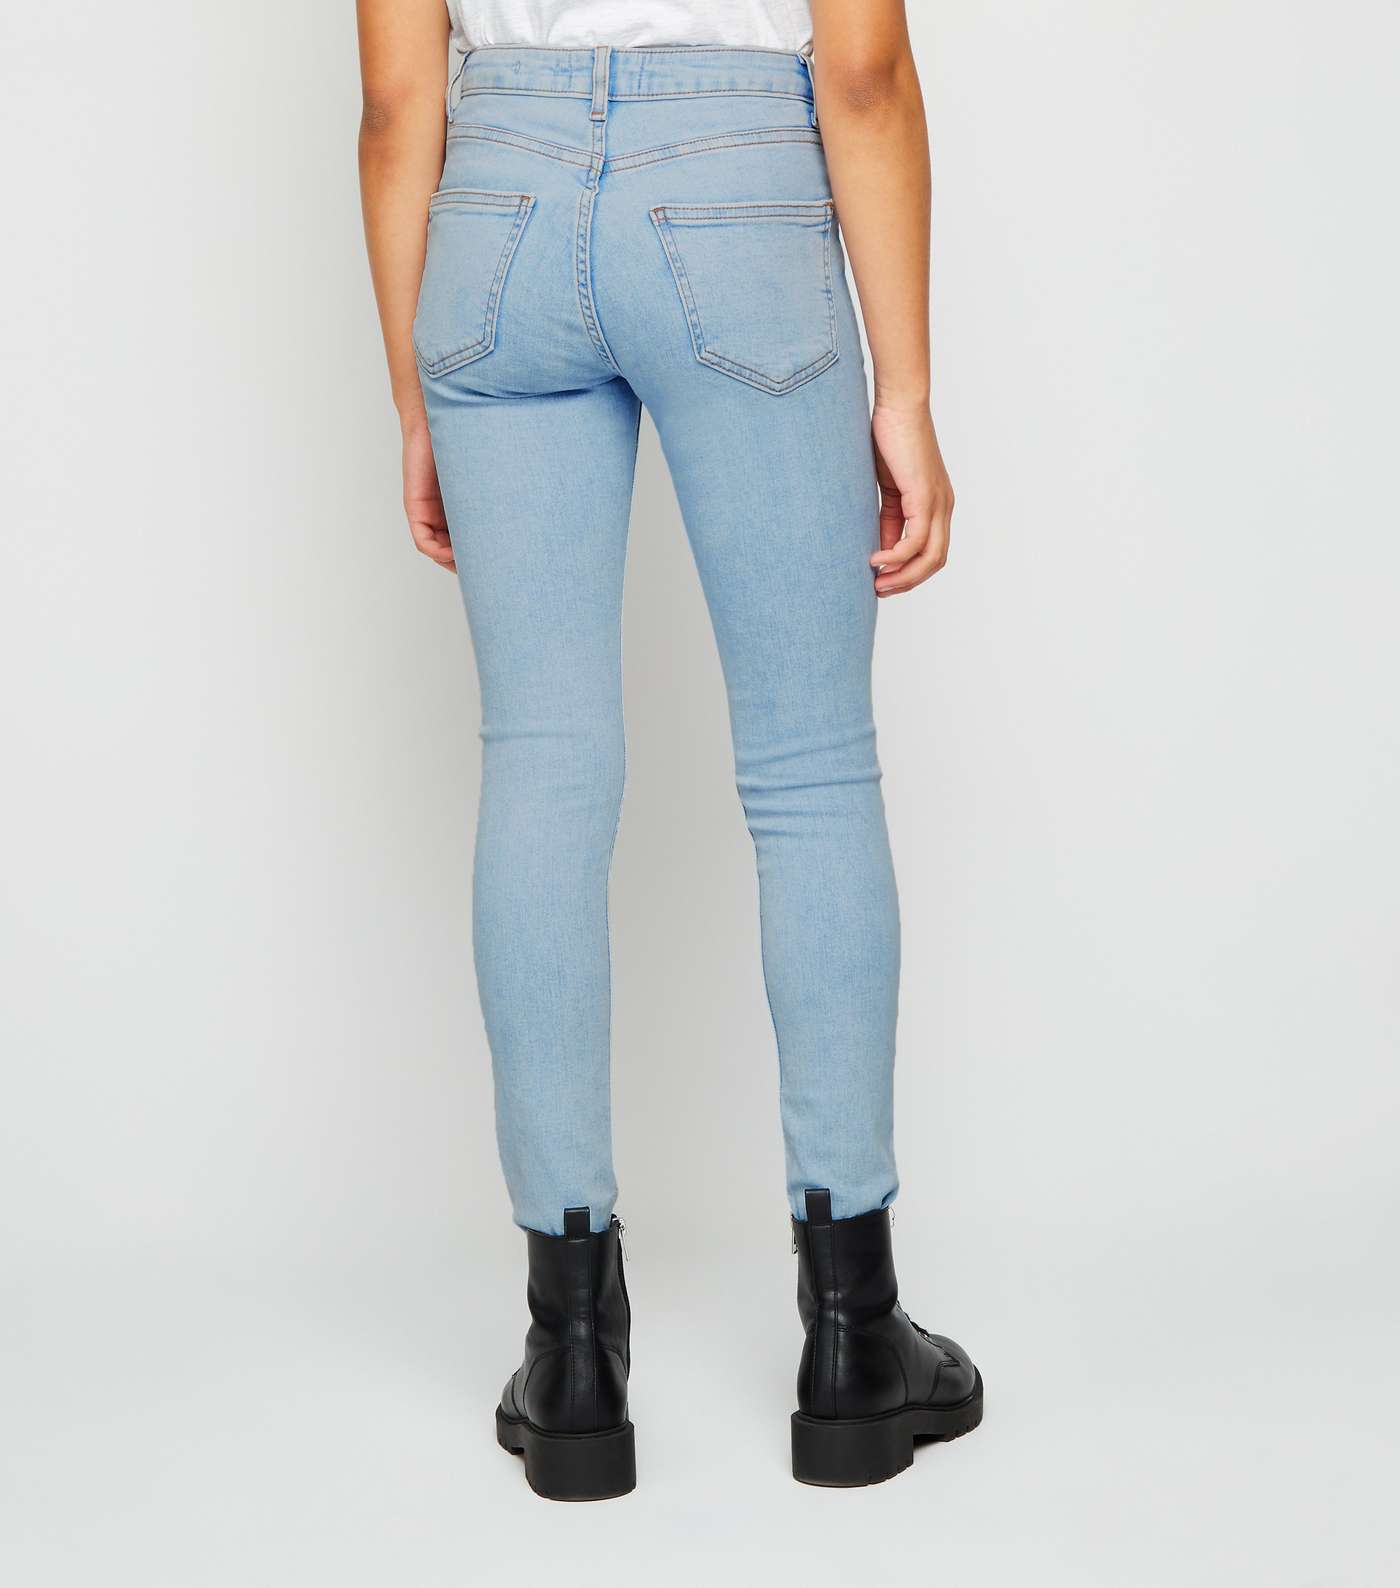 Girls Pale Blue Bleach Ripped Skinny Jeans Image 3